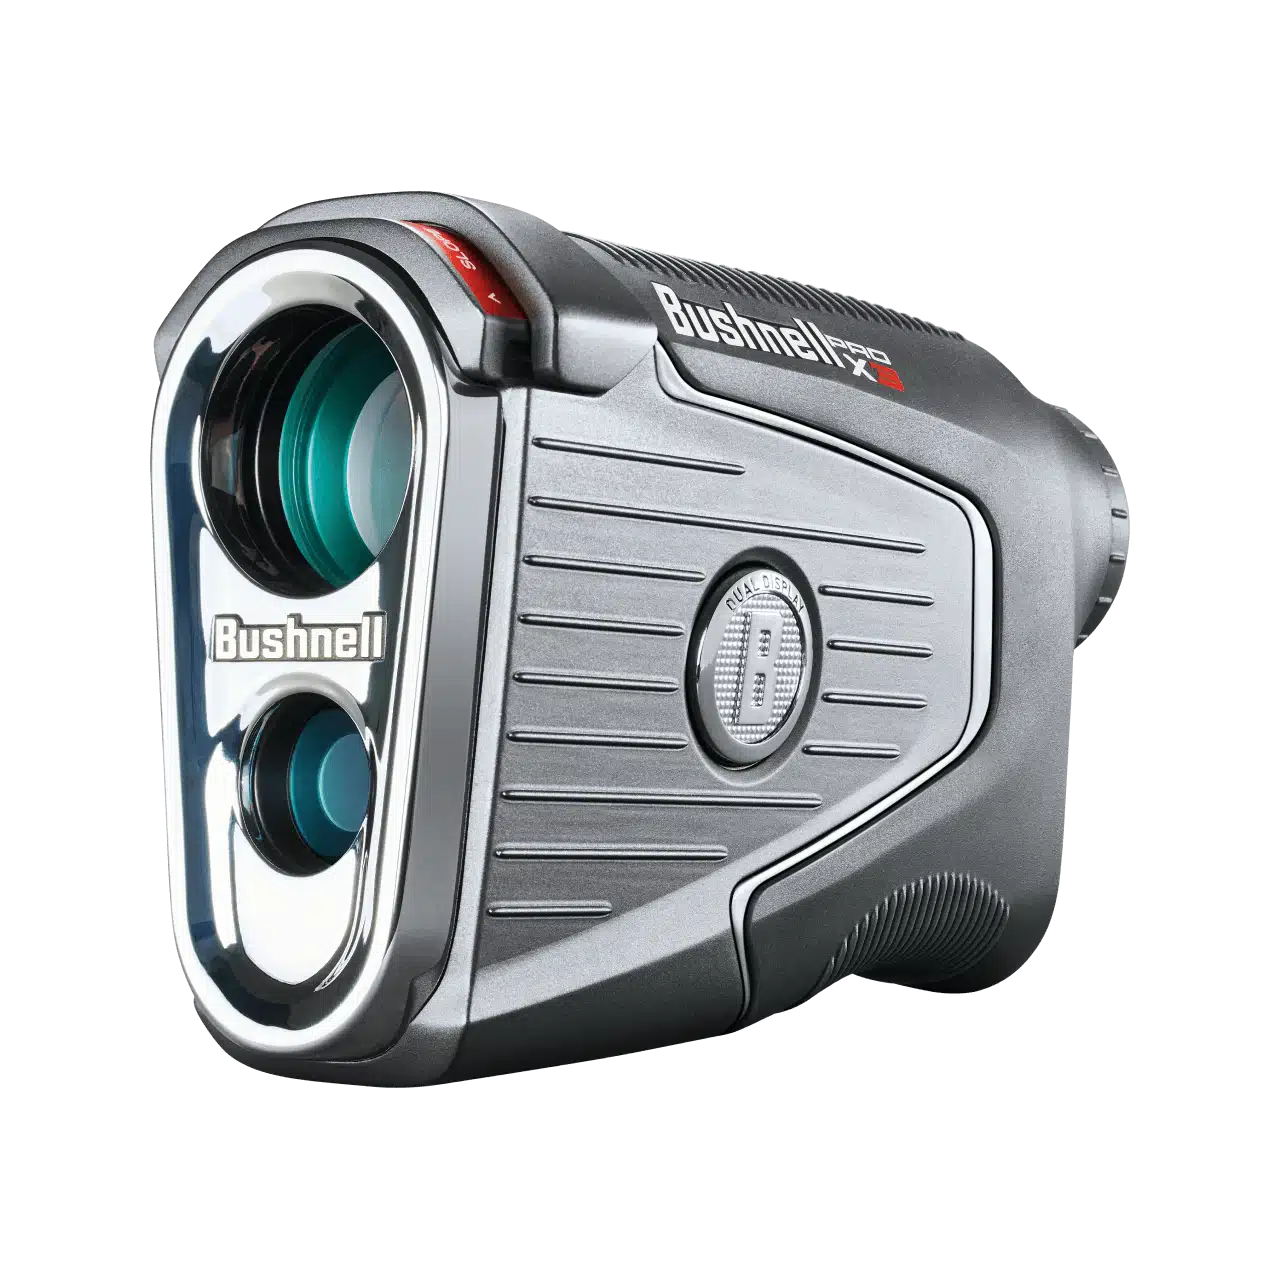 Learn more about the Bushnell Pro X3